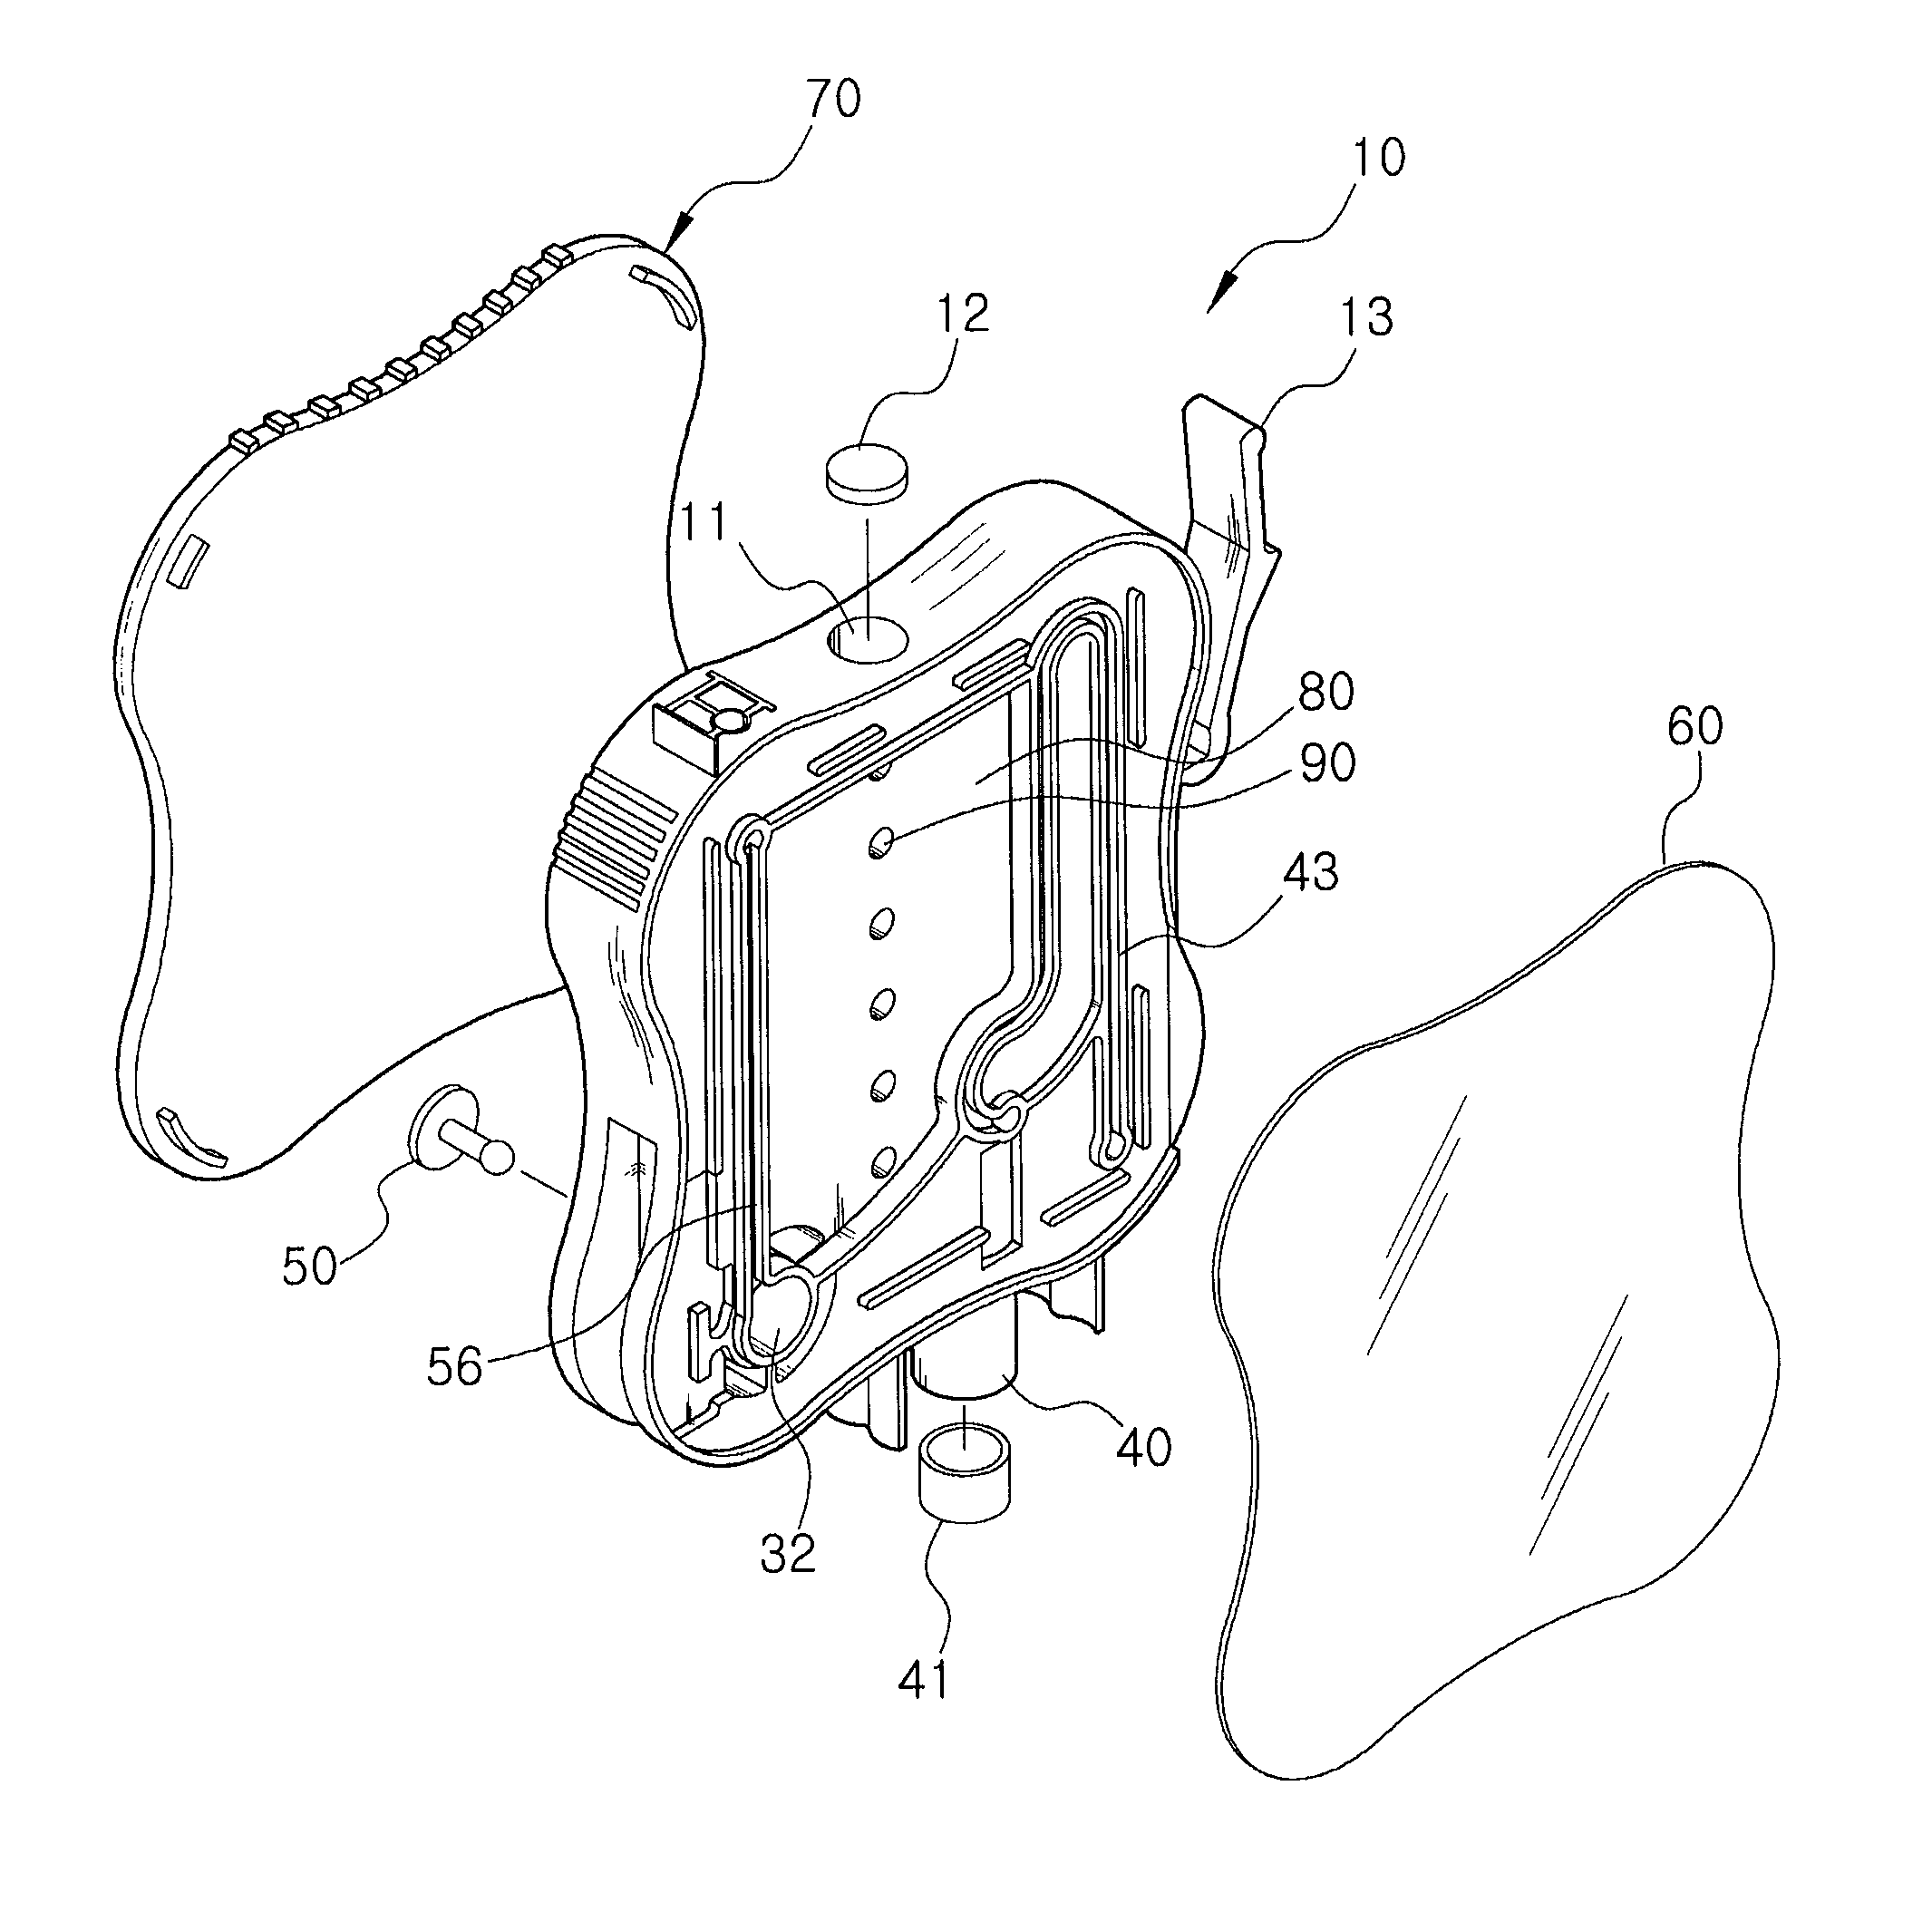 Ink-cartridge for printers and ink refilling method